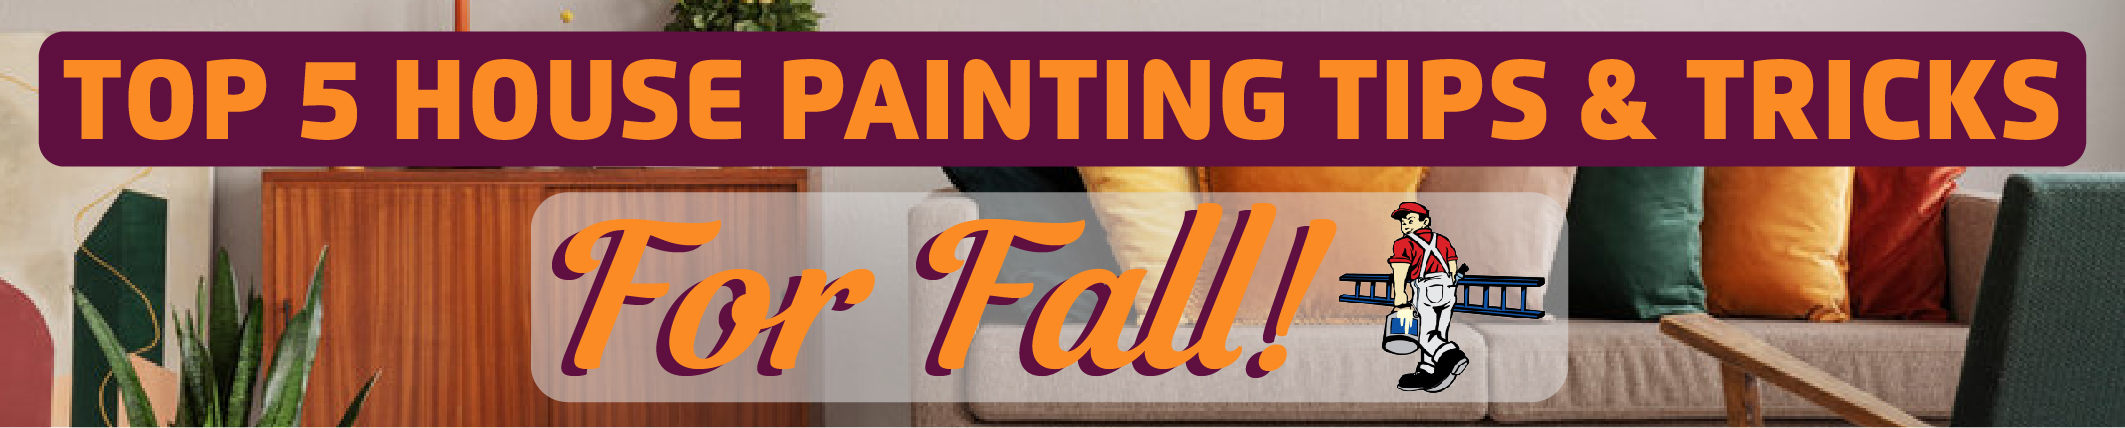 Top 5 House Painting Tips For Fall NM